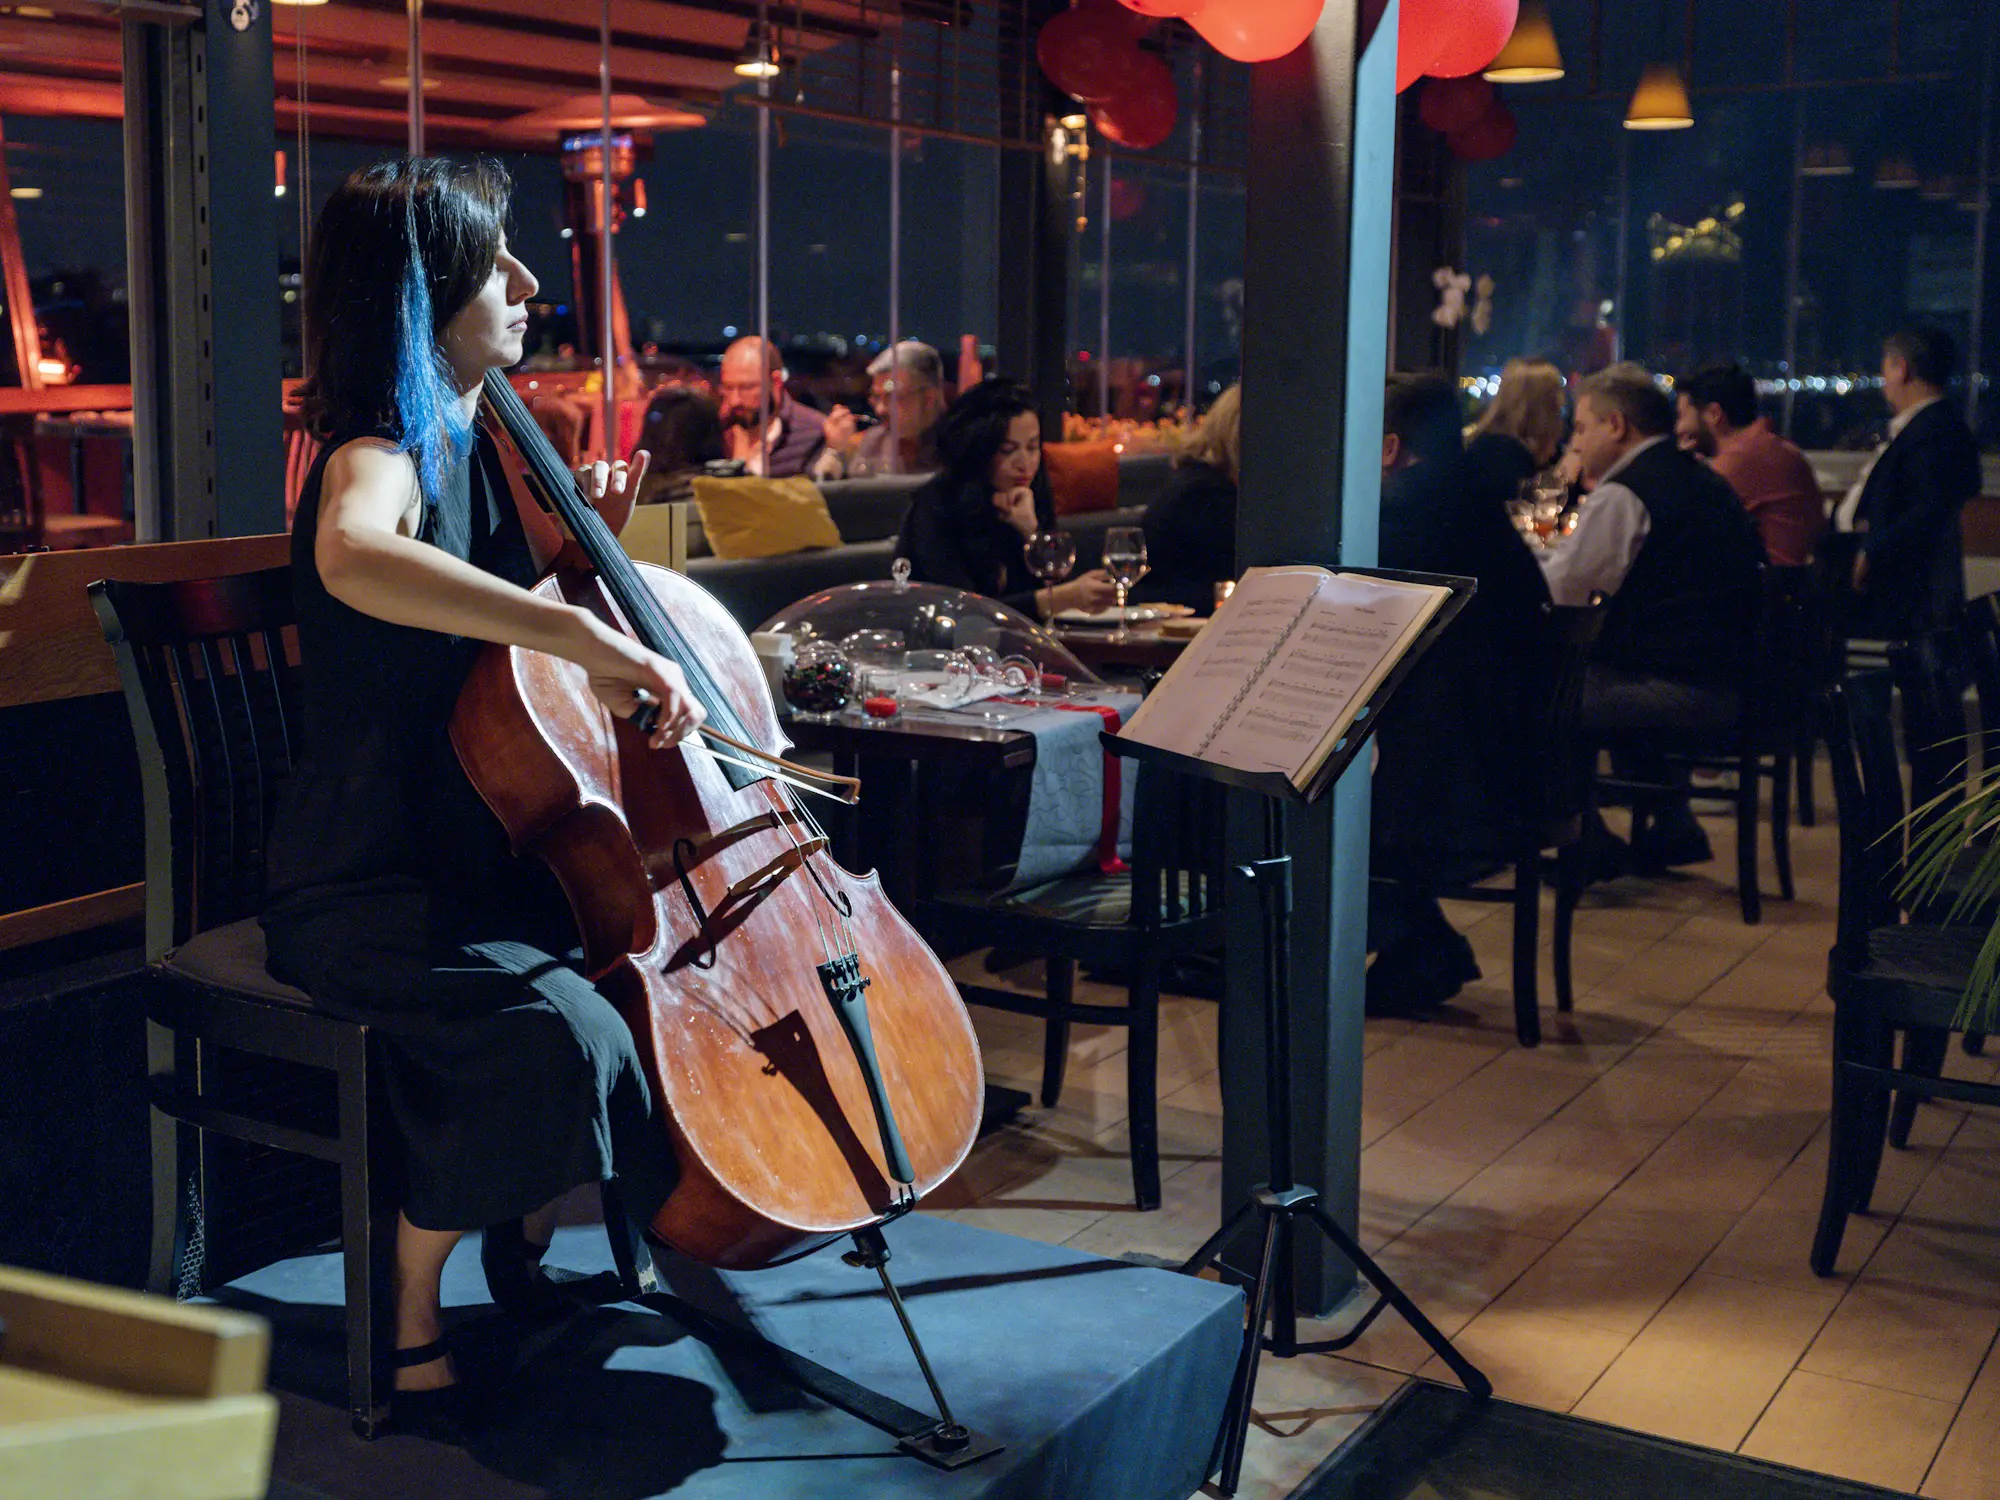 Spend a fun evening at Litera with the energy of Beyoğlu.